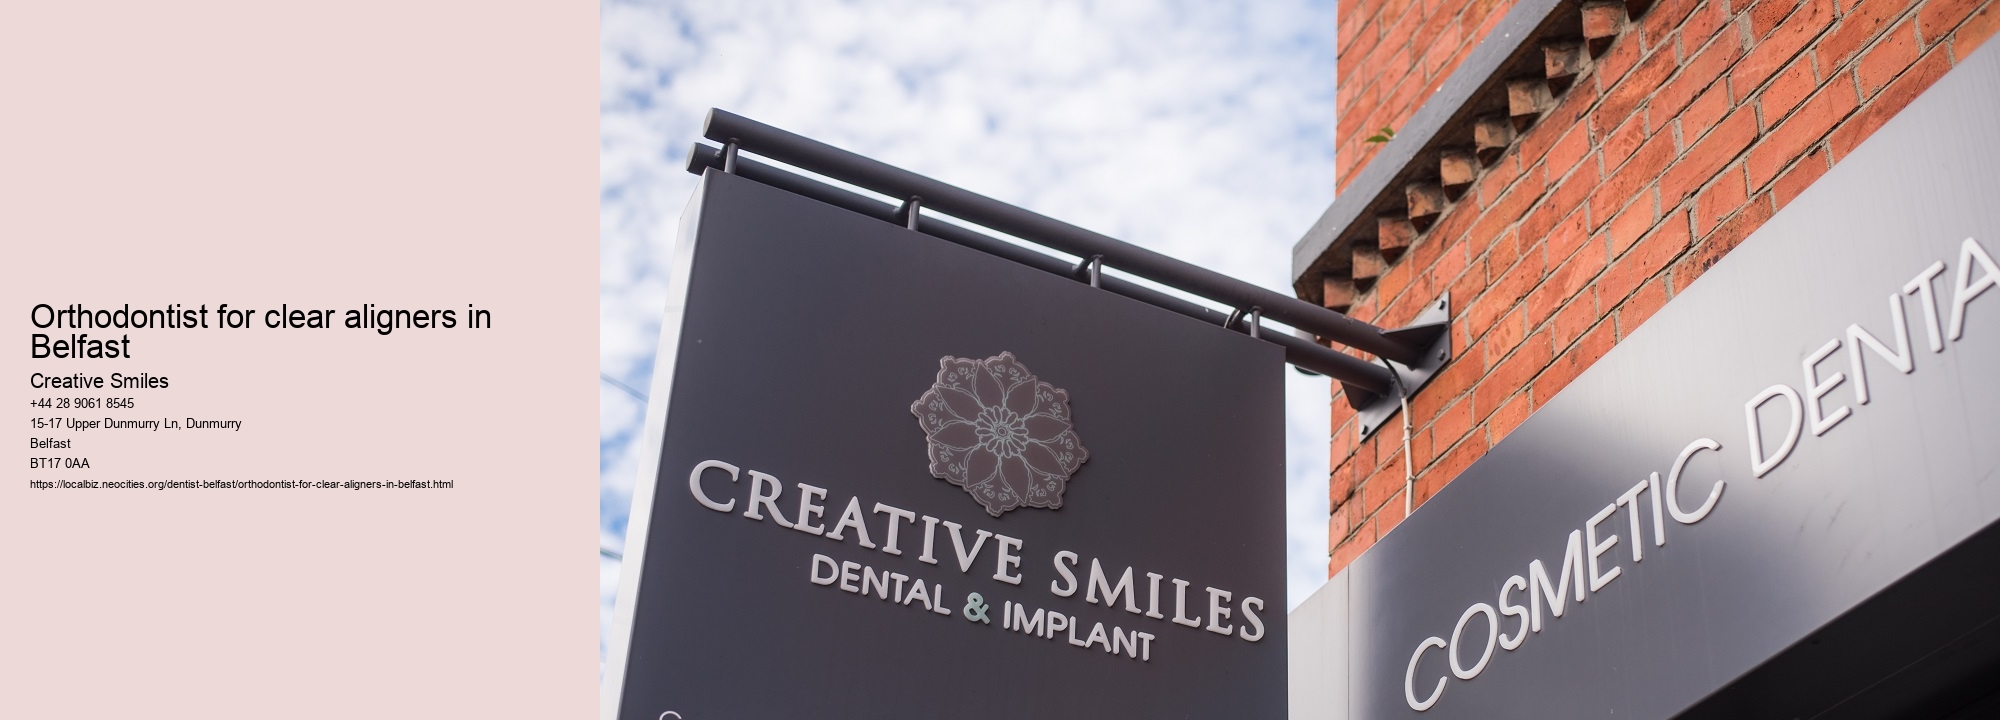 Orthodontist for clear aligners in Belfast